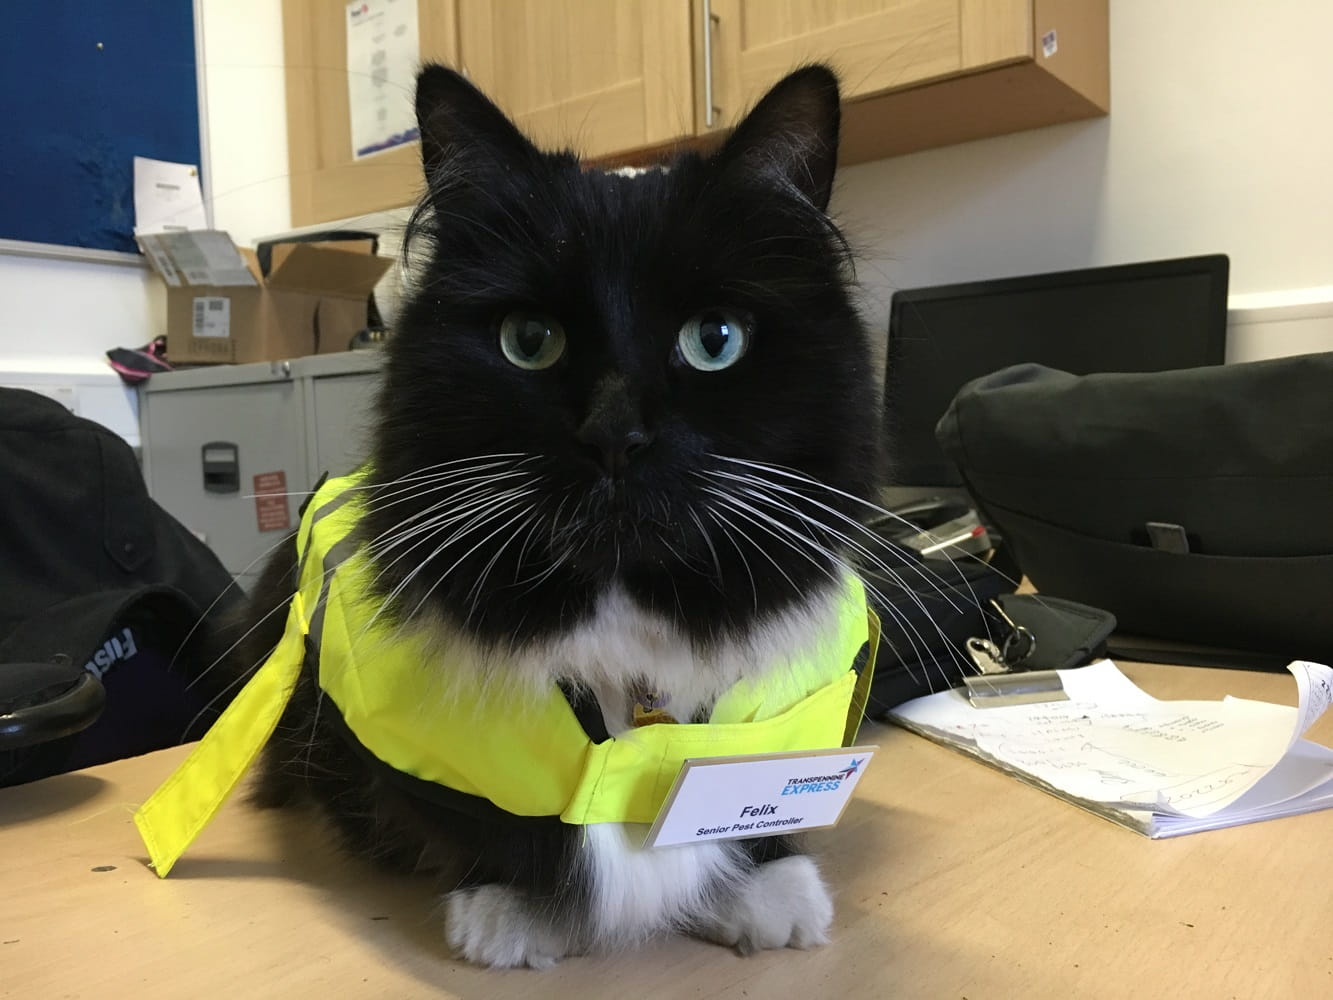 Felix the cat in a high-vis jacket